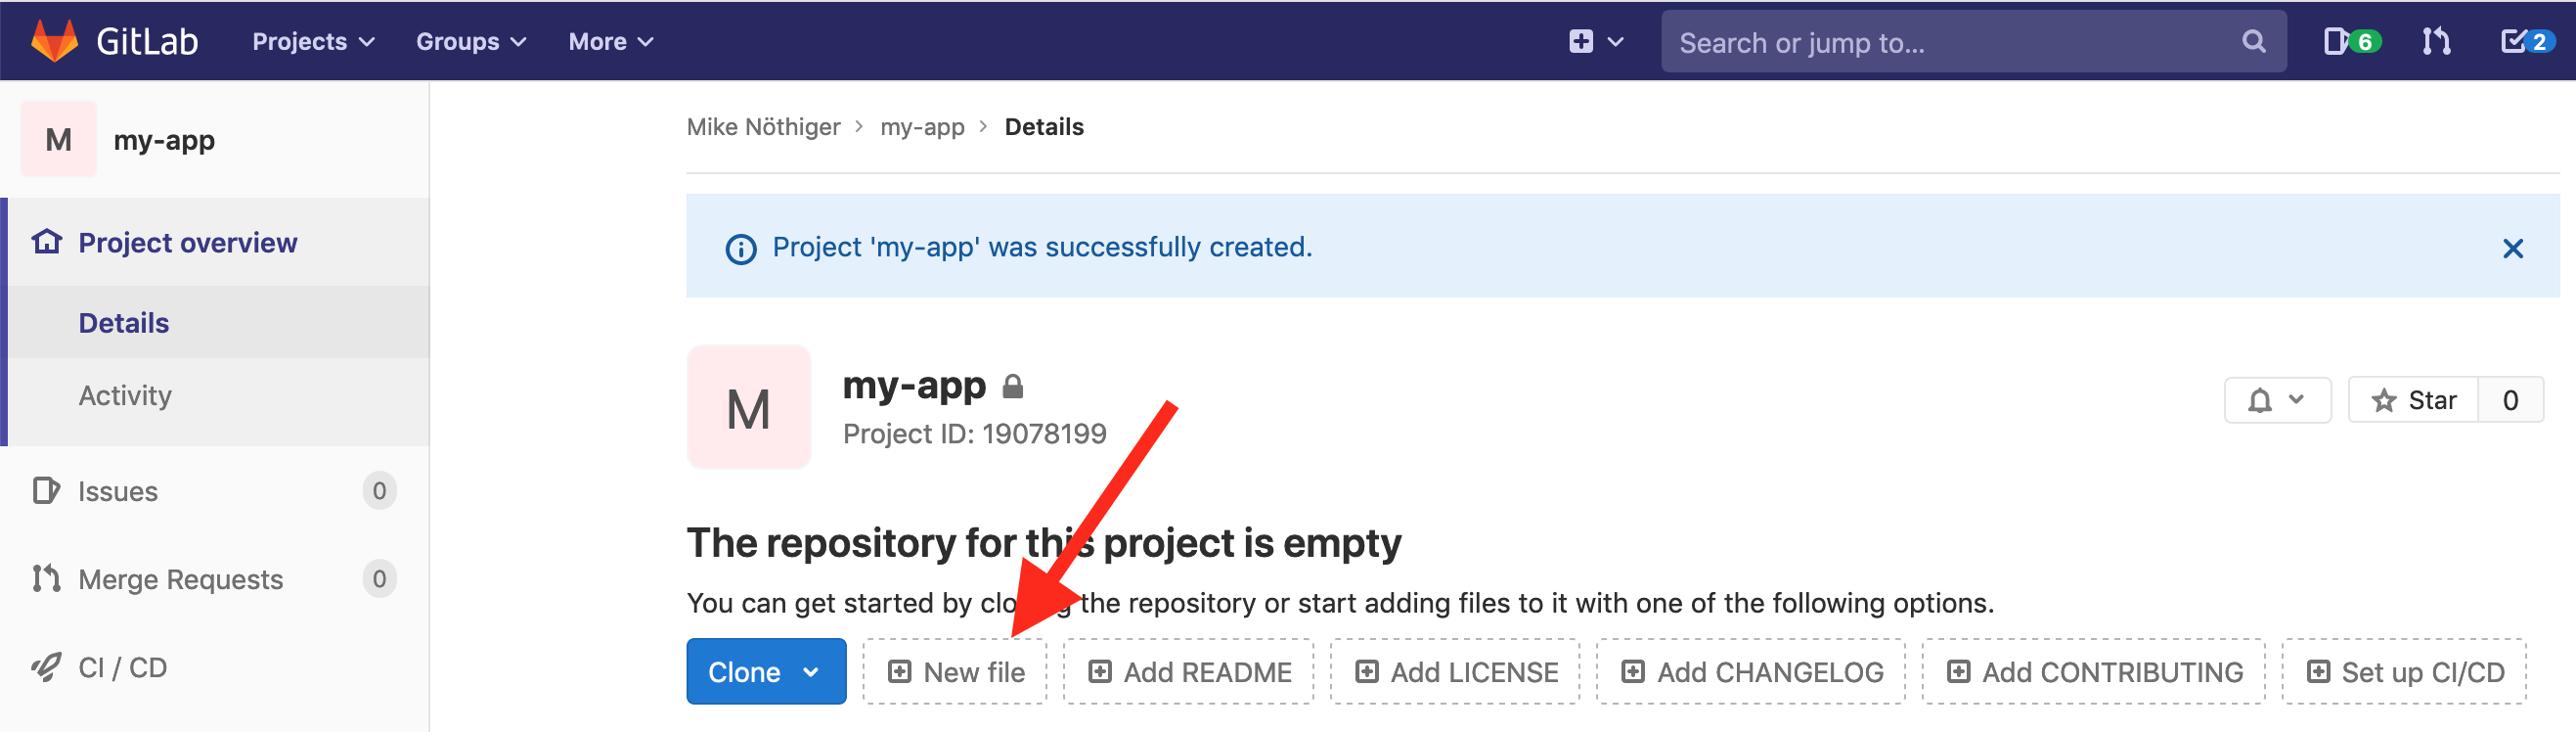 The new file button on the project overview page